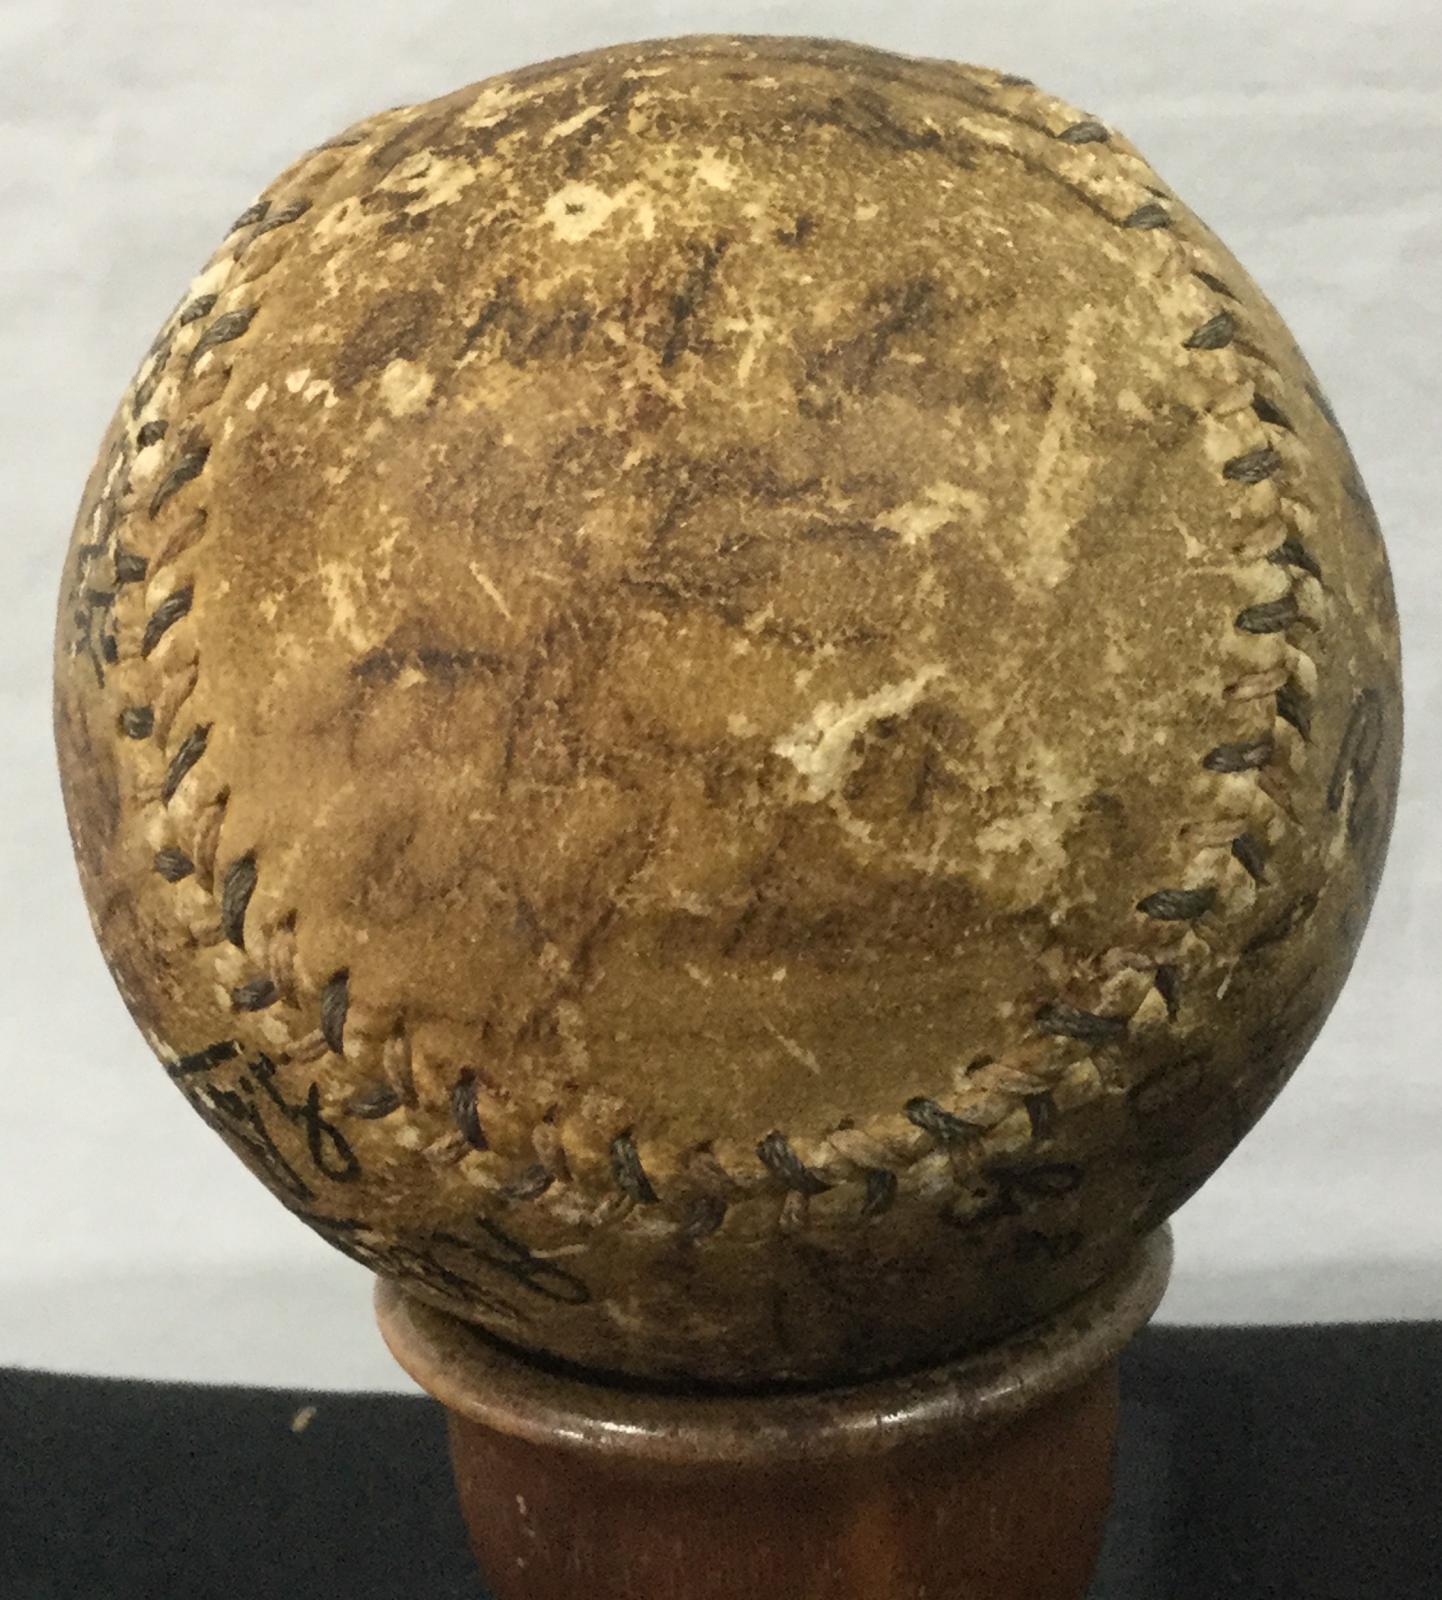 1936 signed baseball from the first games between Western Australia and Victoria